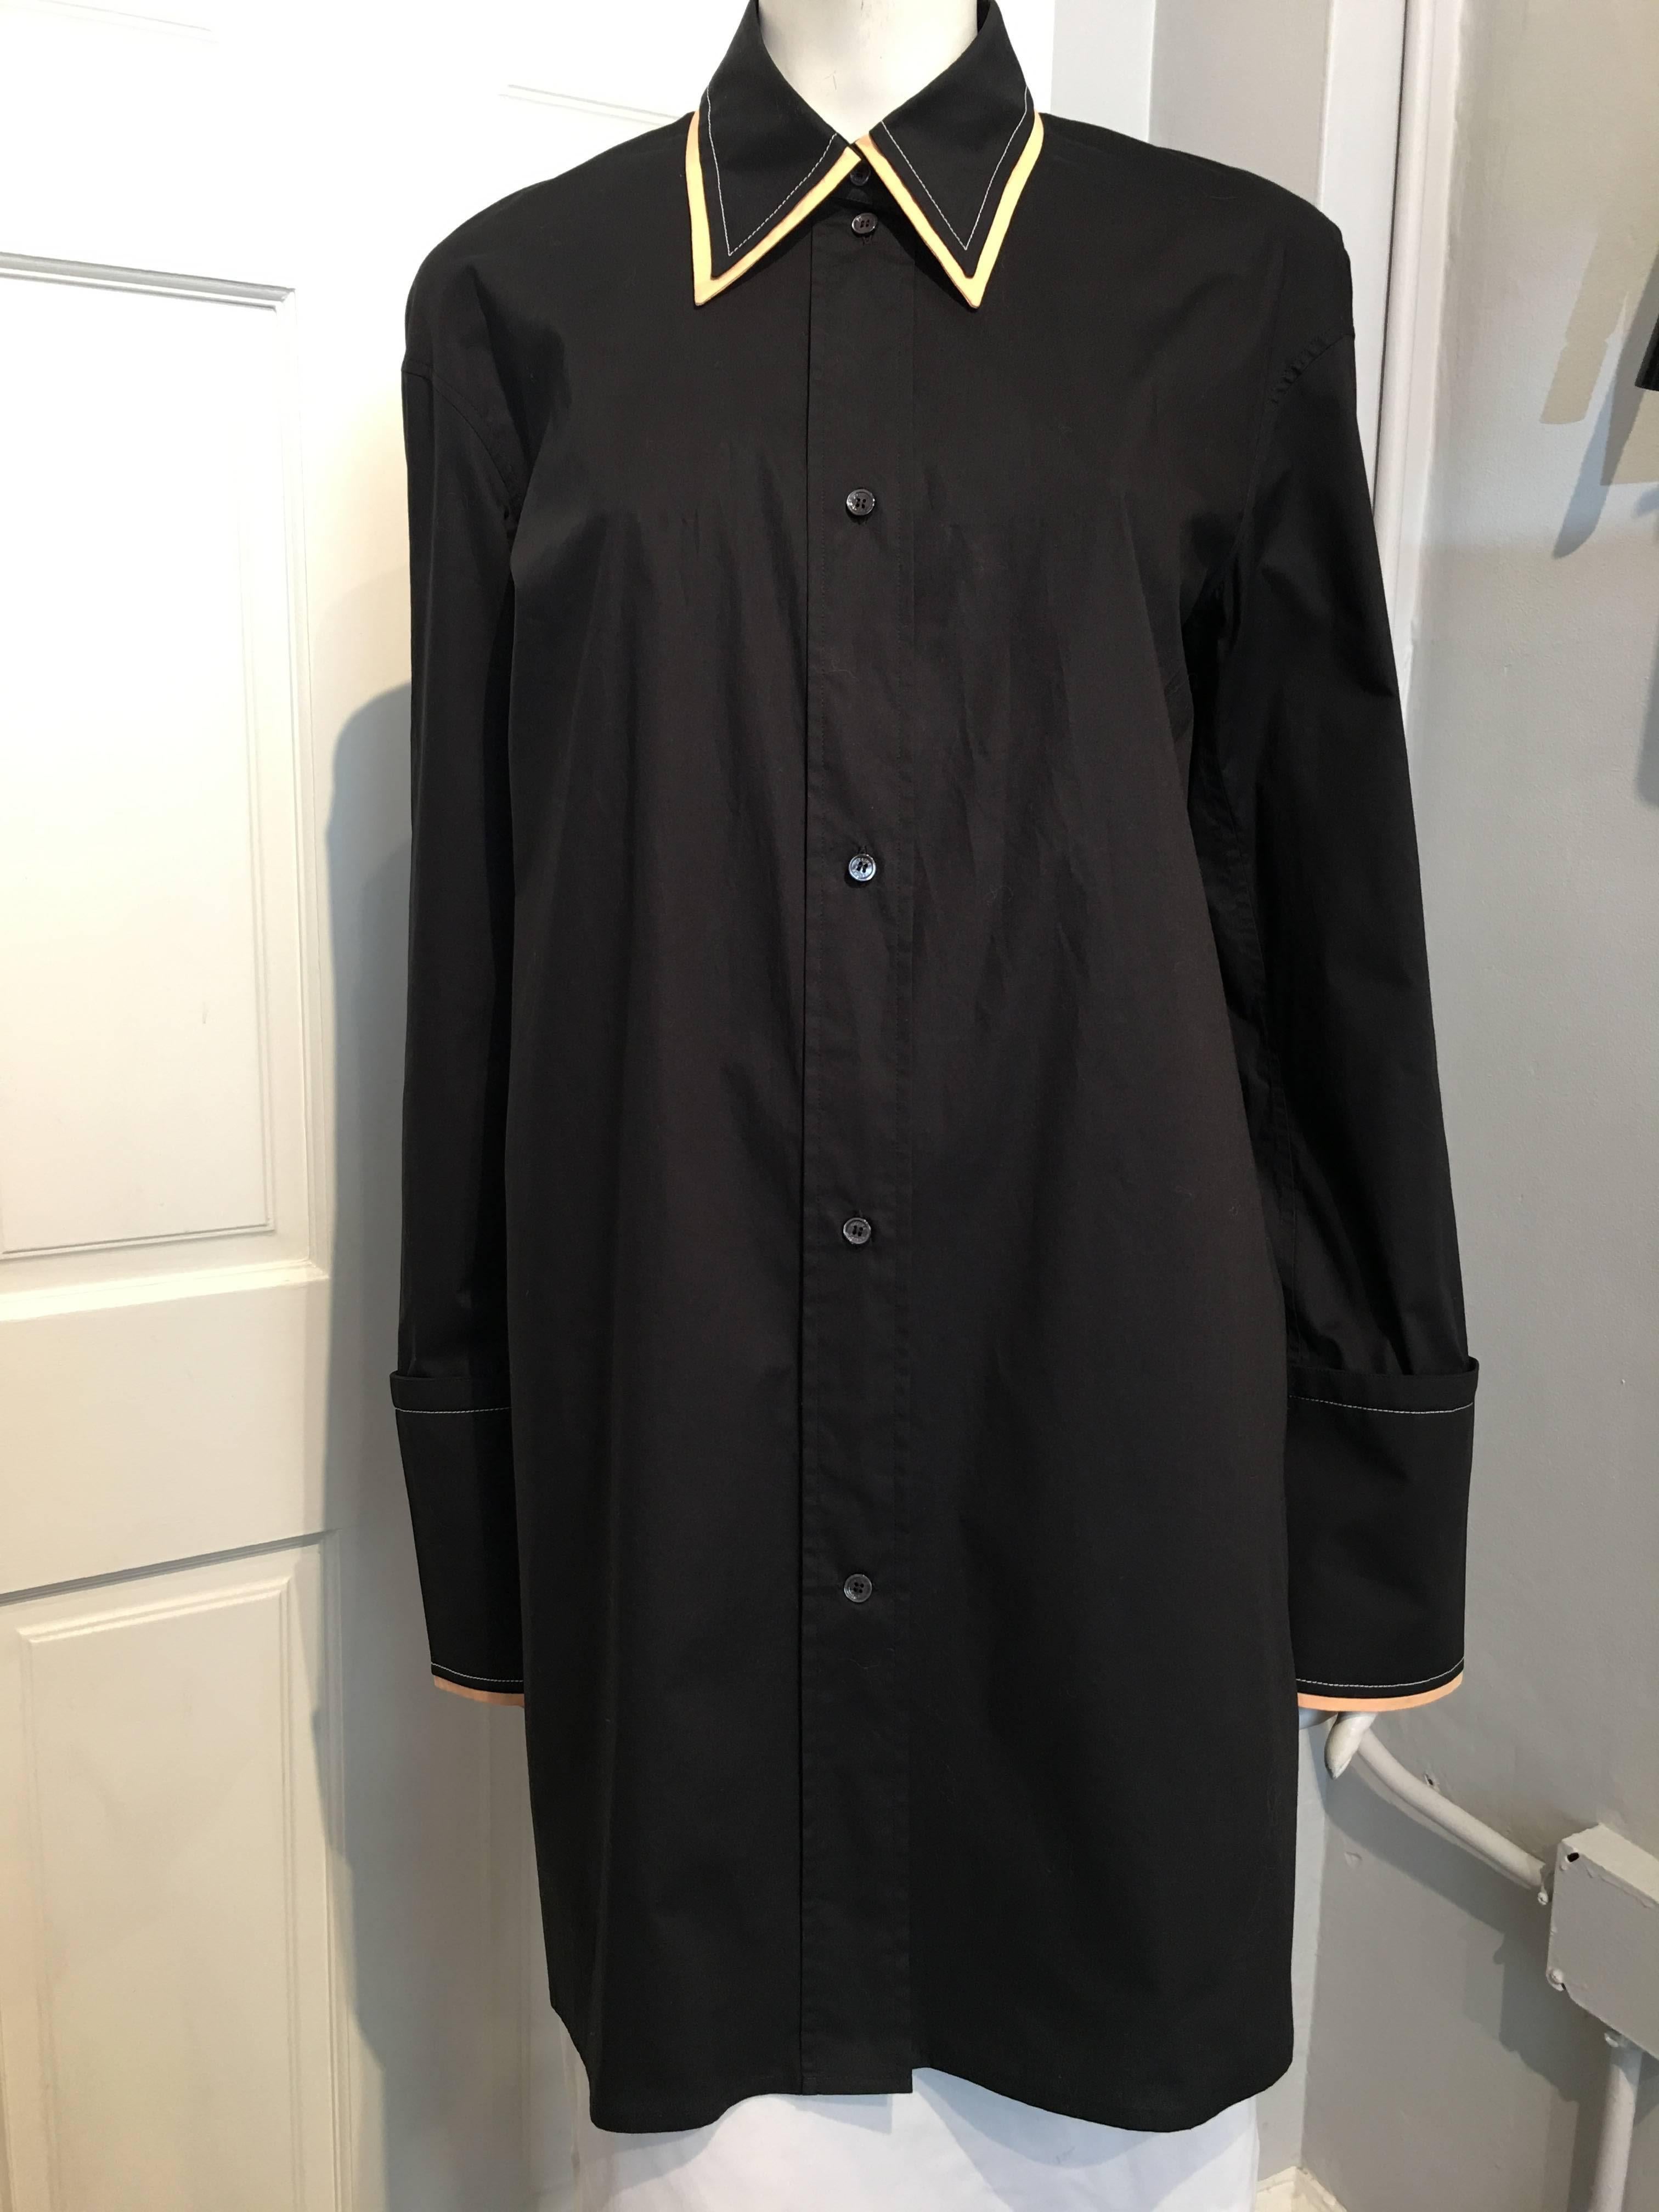 Celine black oversize cotton shirt from the fall 2016 collection. New with tags.